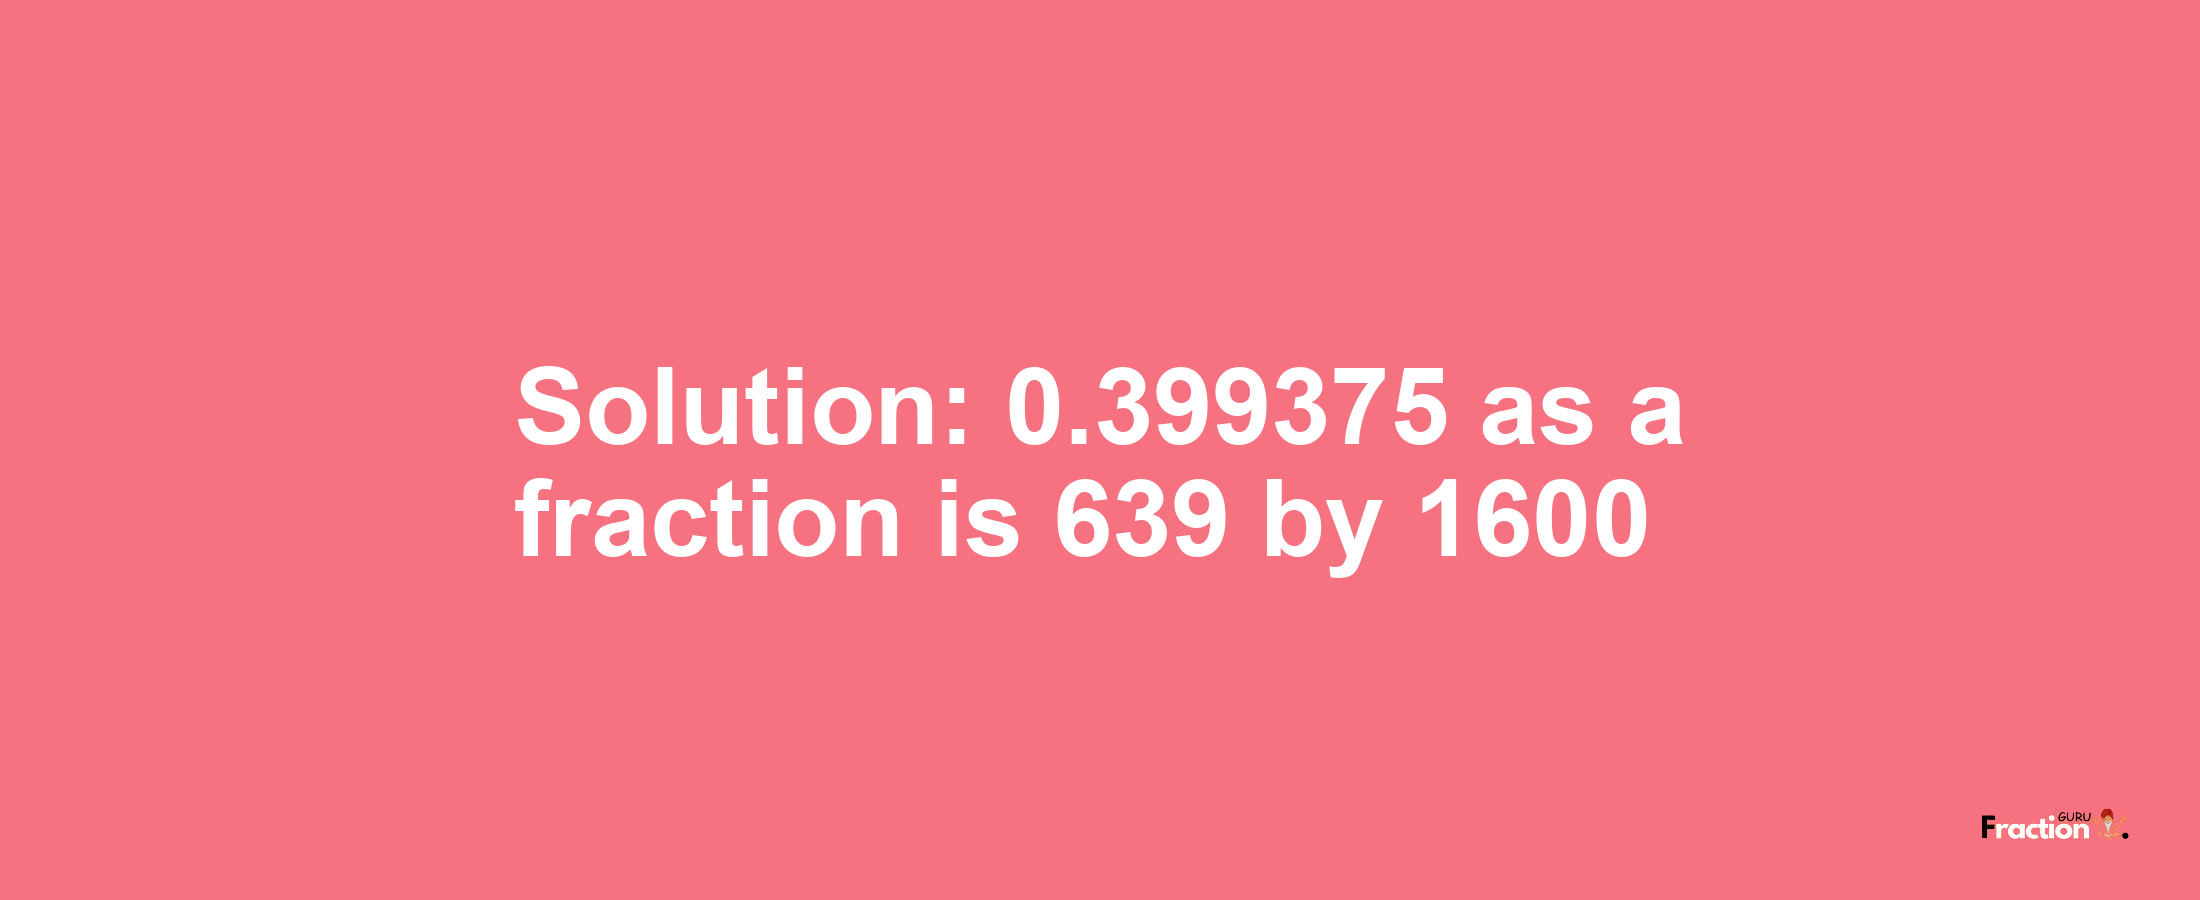 Solution:0.399375 as a fraction is 639/1600